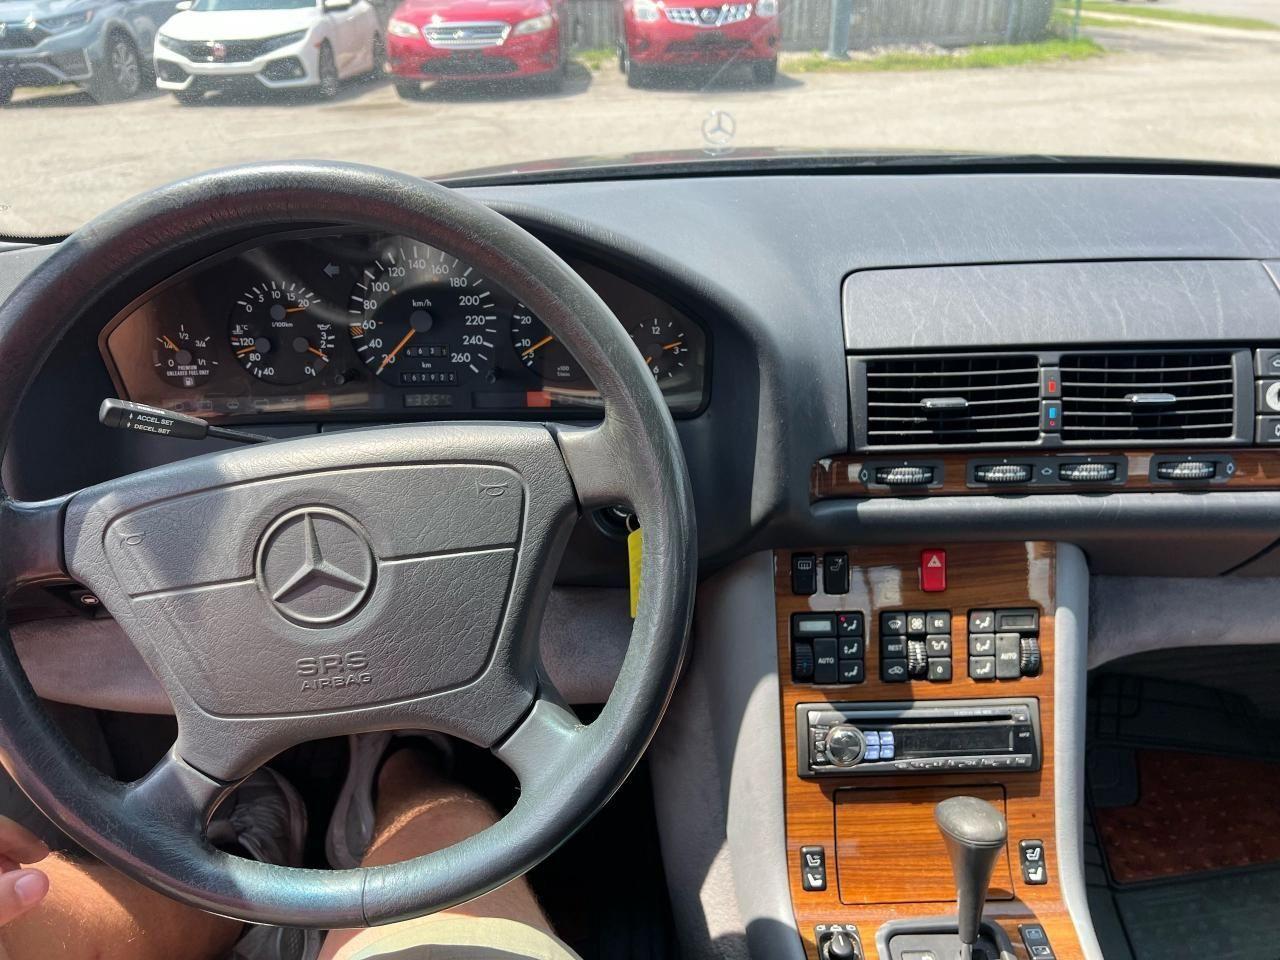 1992 Mercedes-Benz 300SE 300 SE*ONLY 162KMS*LEATHER*GREAT SHAPE*AS IS - Photo #12